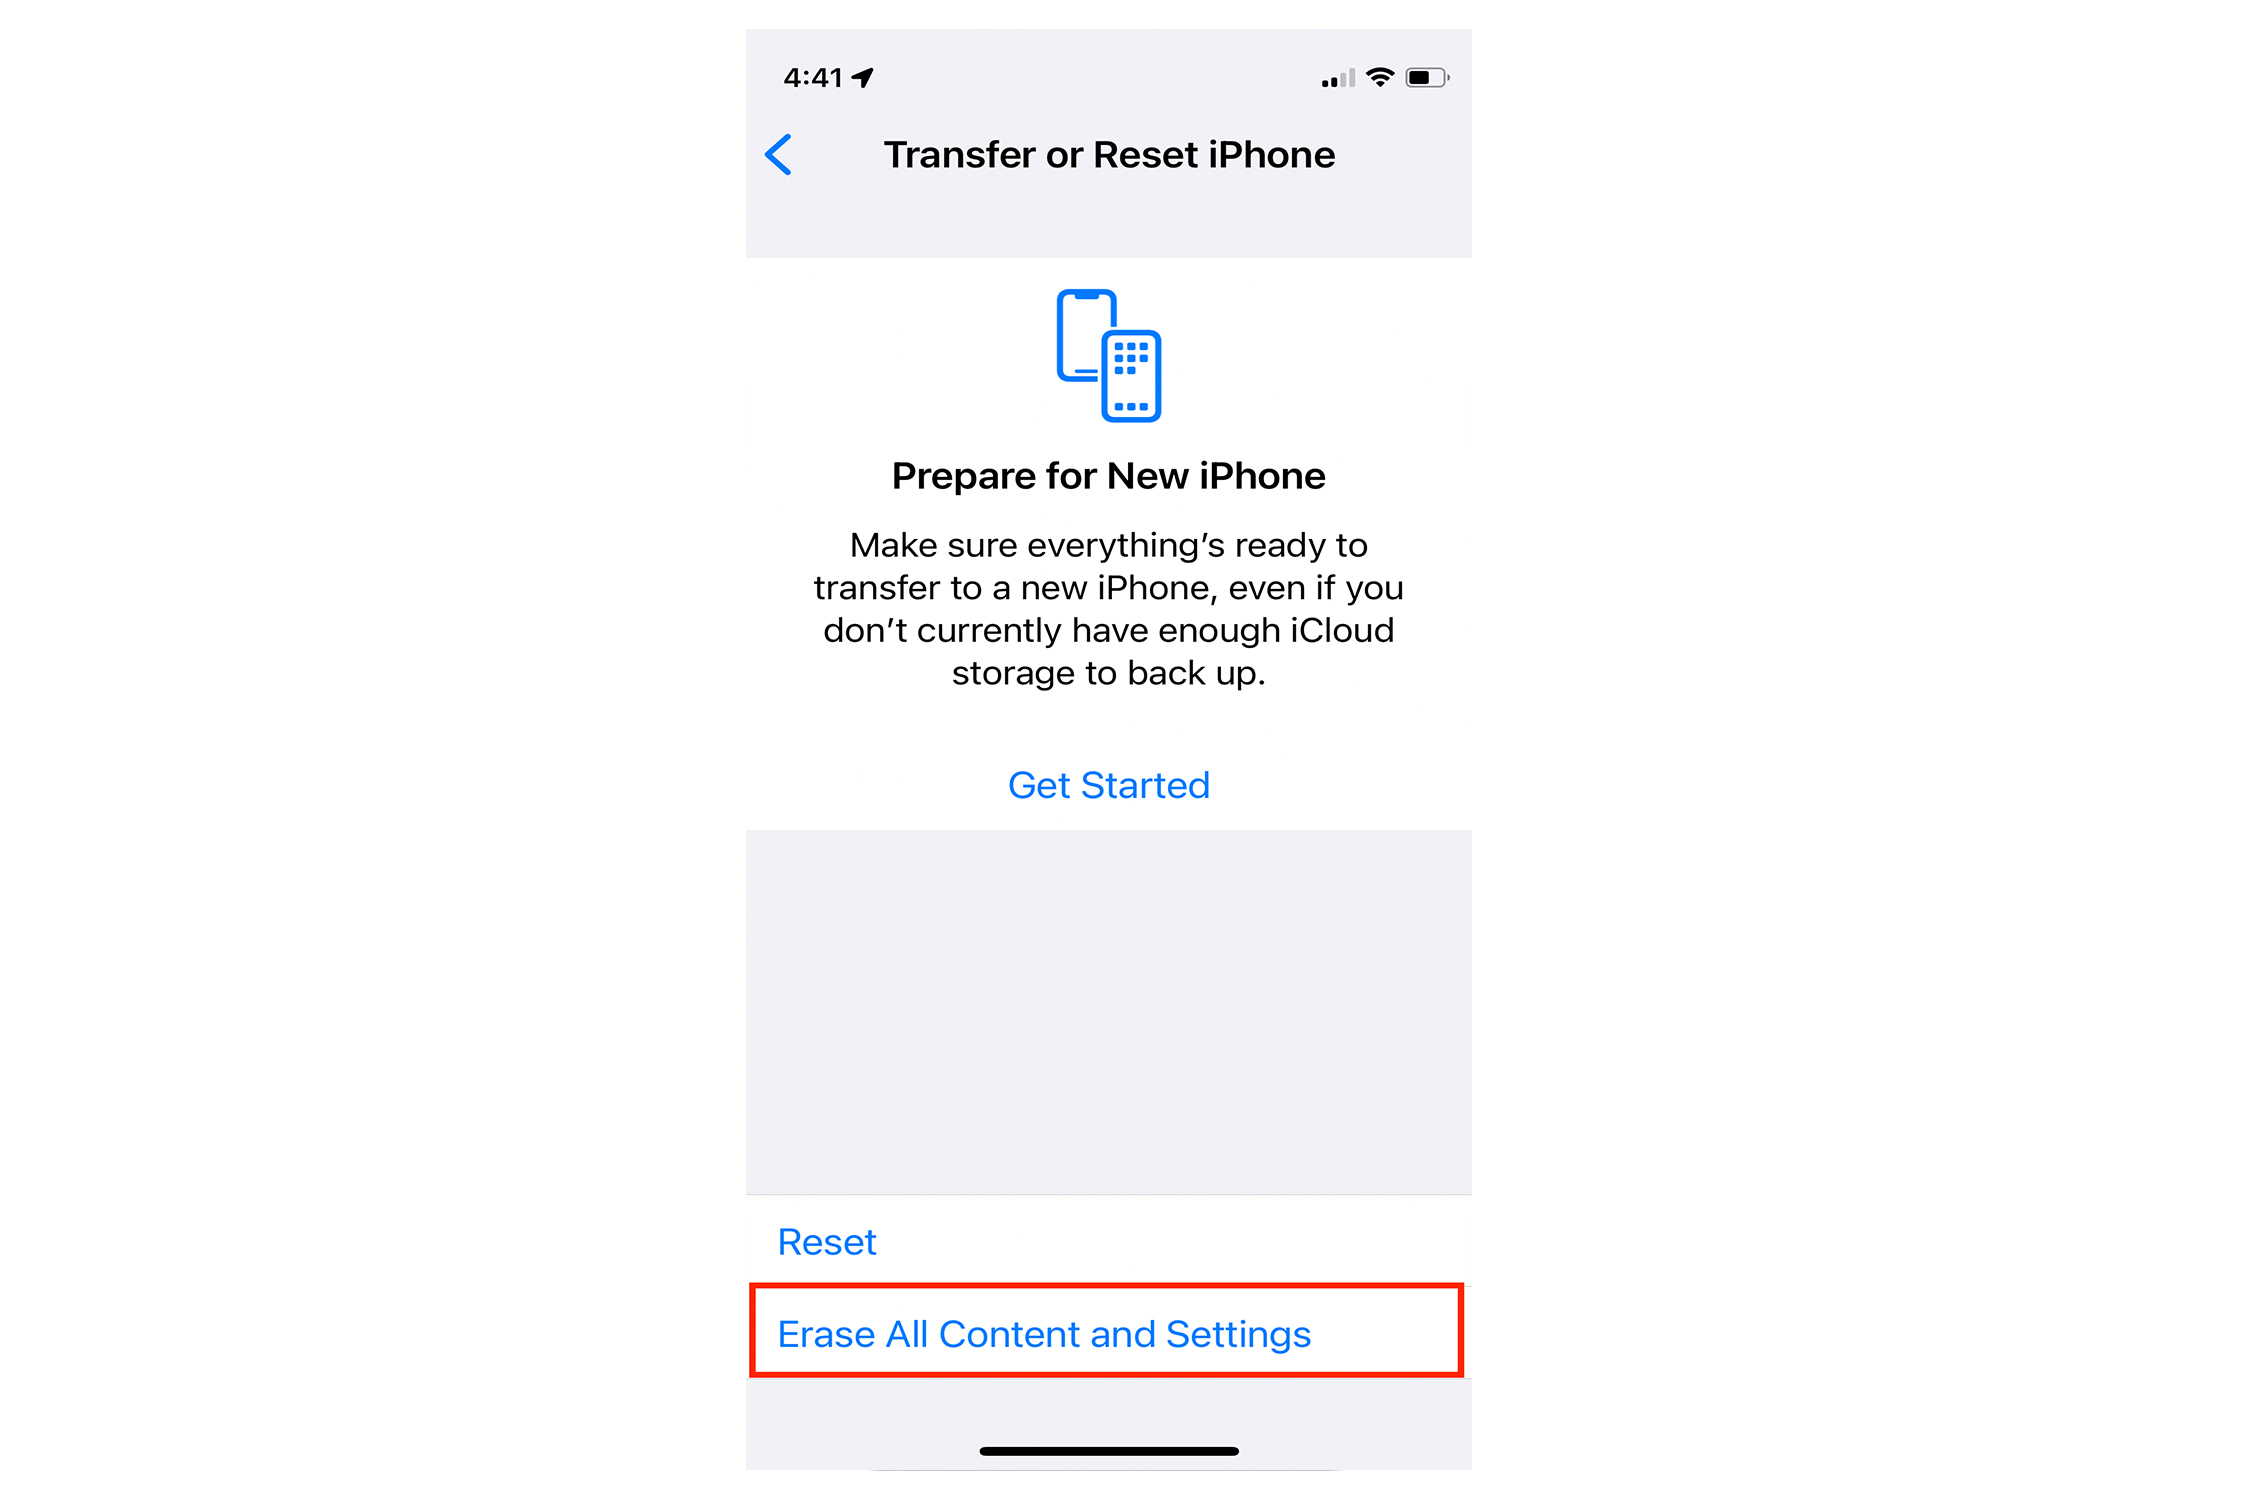 iPhone Erase and Reset setting.